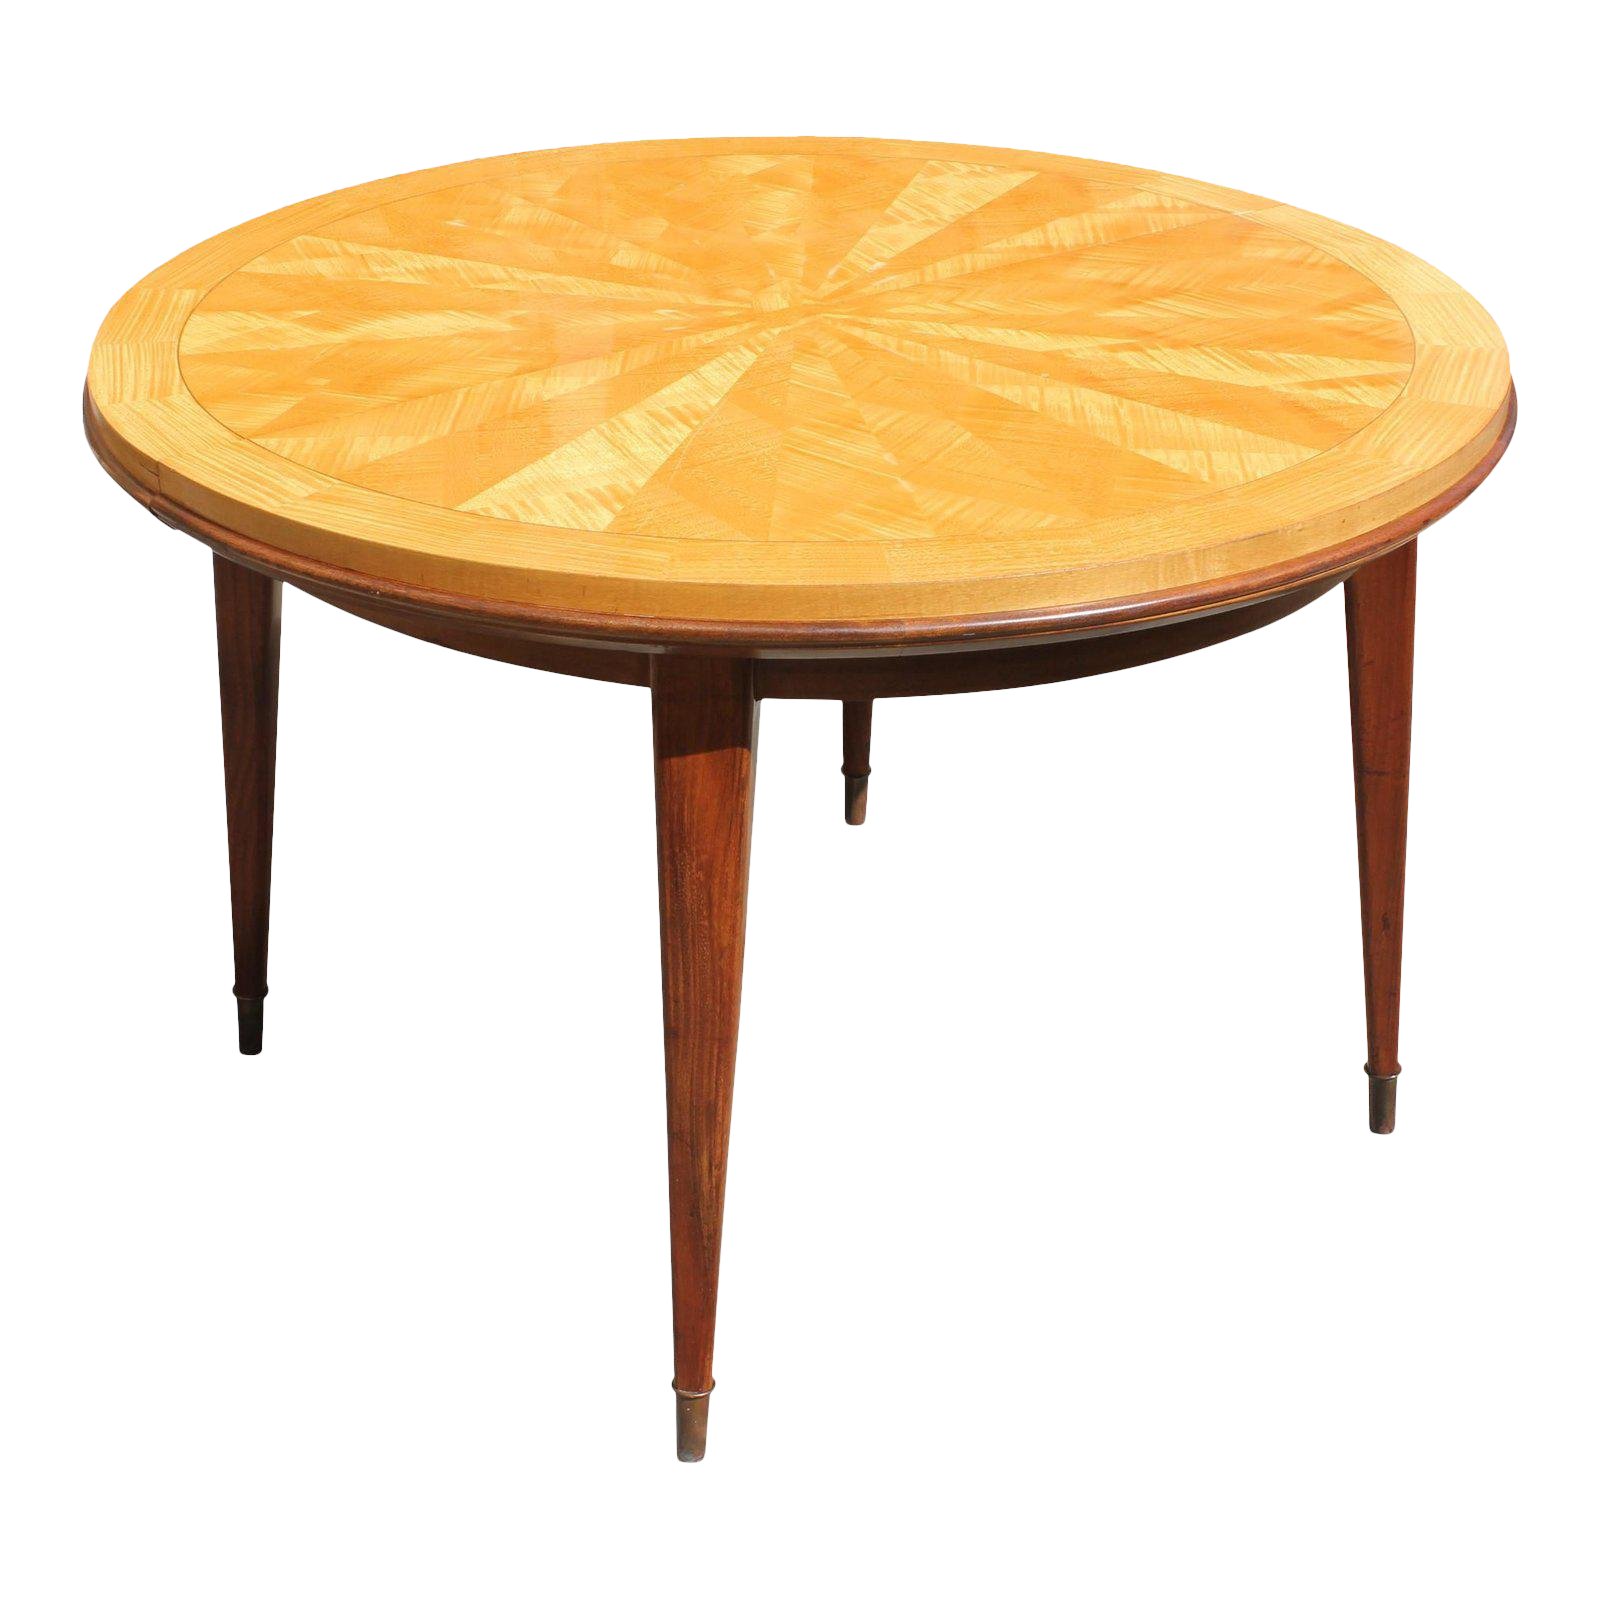 vintage jules leleu french art deco sunburst round dining table small accent chairish pink chandelier lamp door floor plate low outdoor pottery barn farm furniture for spaces